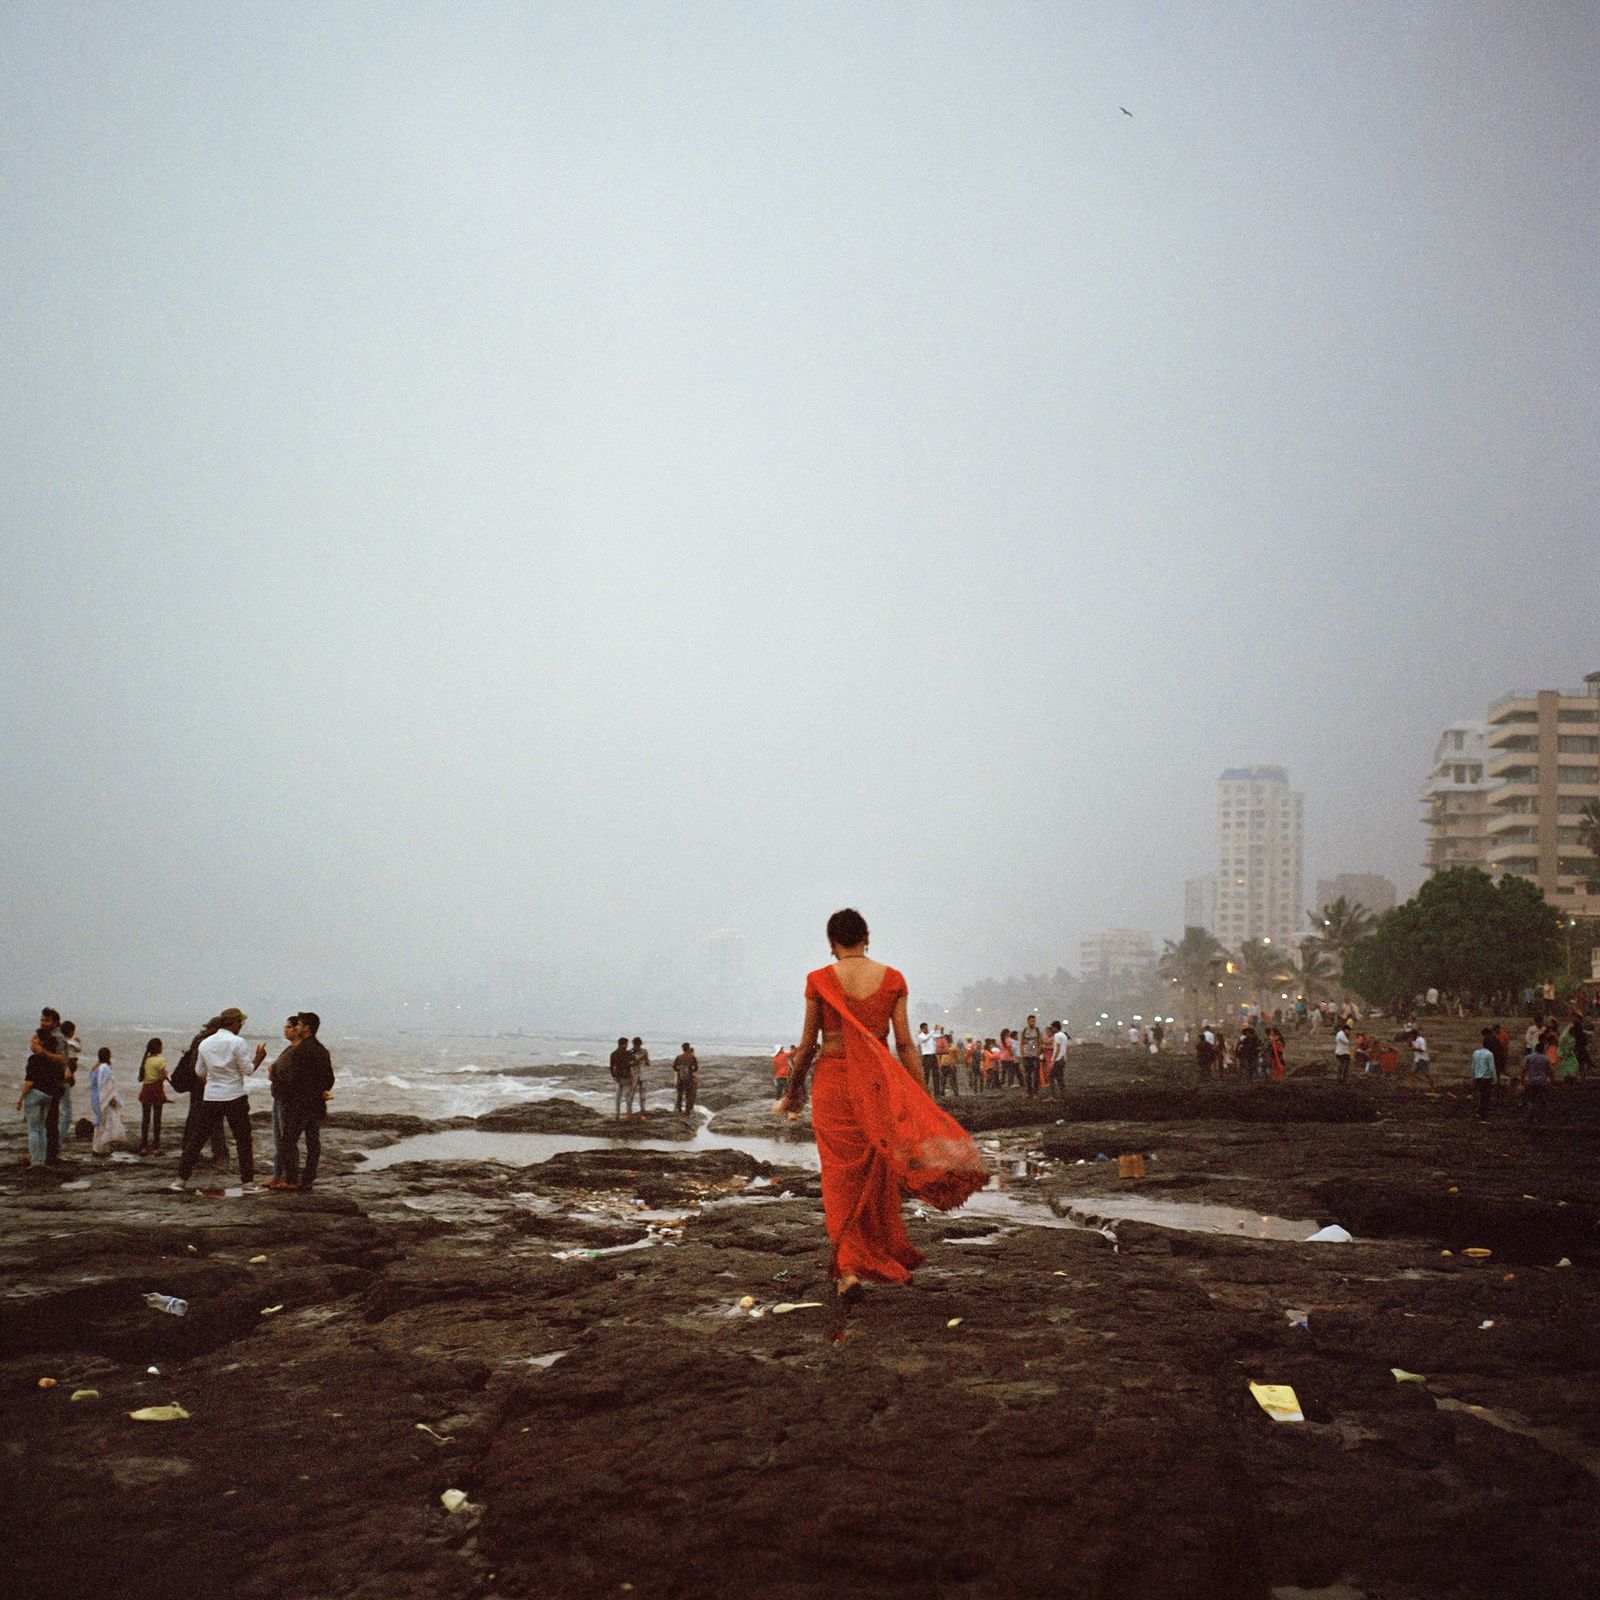 © Sara Hylton - Image from the The Demigods of India photography project